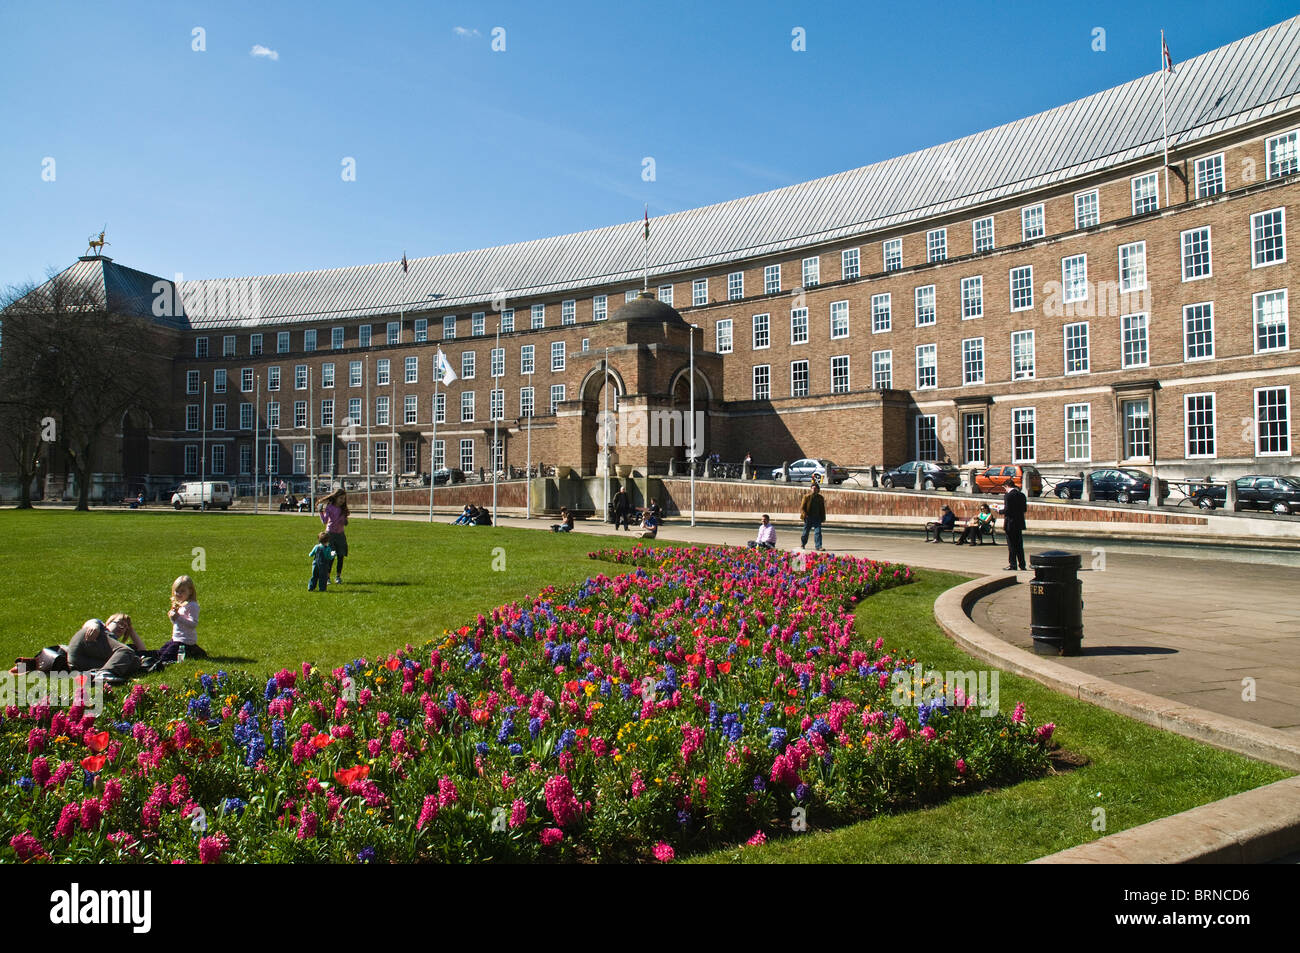 dh Bristol City hall COLLEGE GREEN BRISTOL The Council House building college green flower display flowers public space Stock Photo